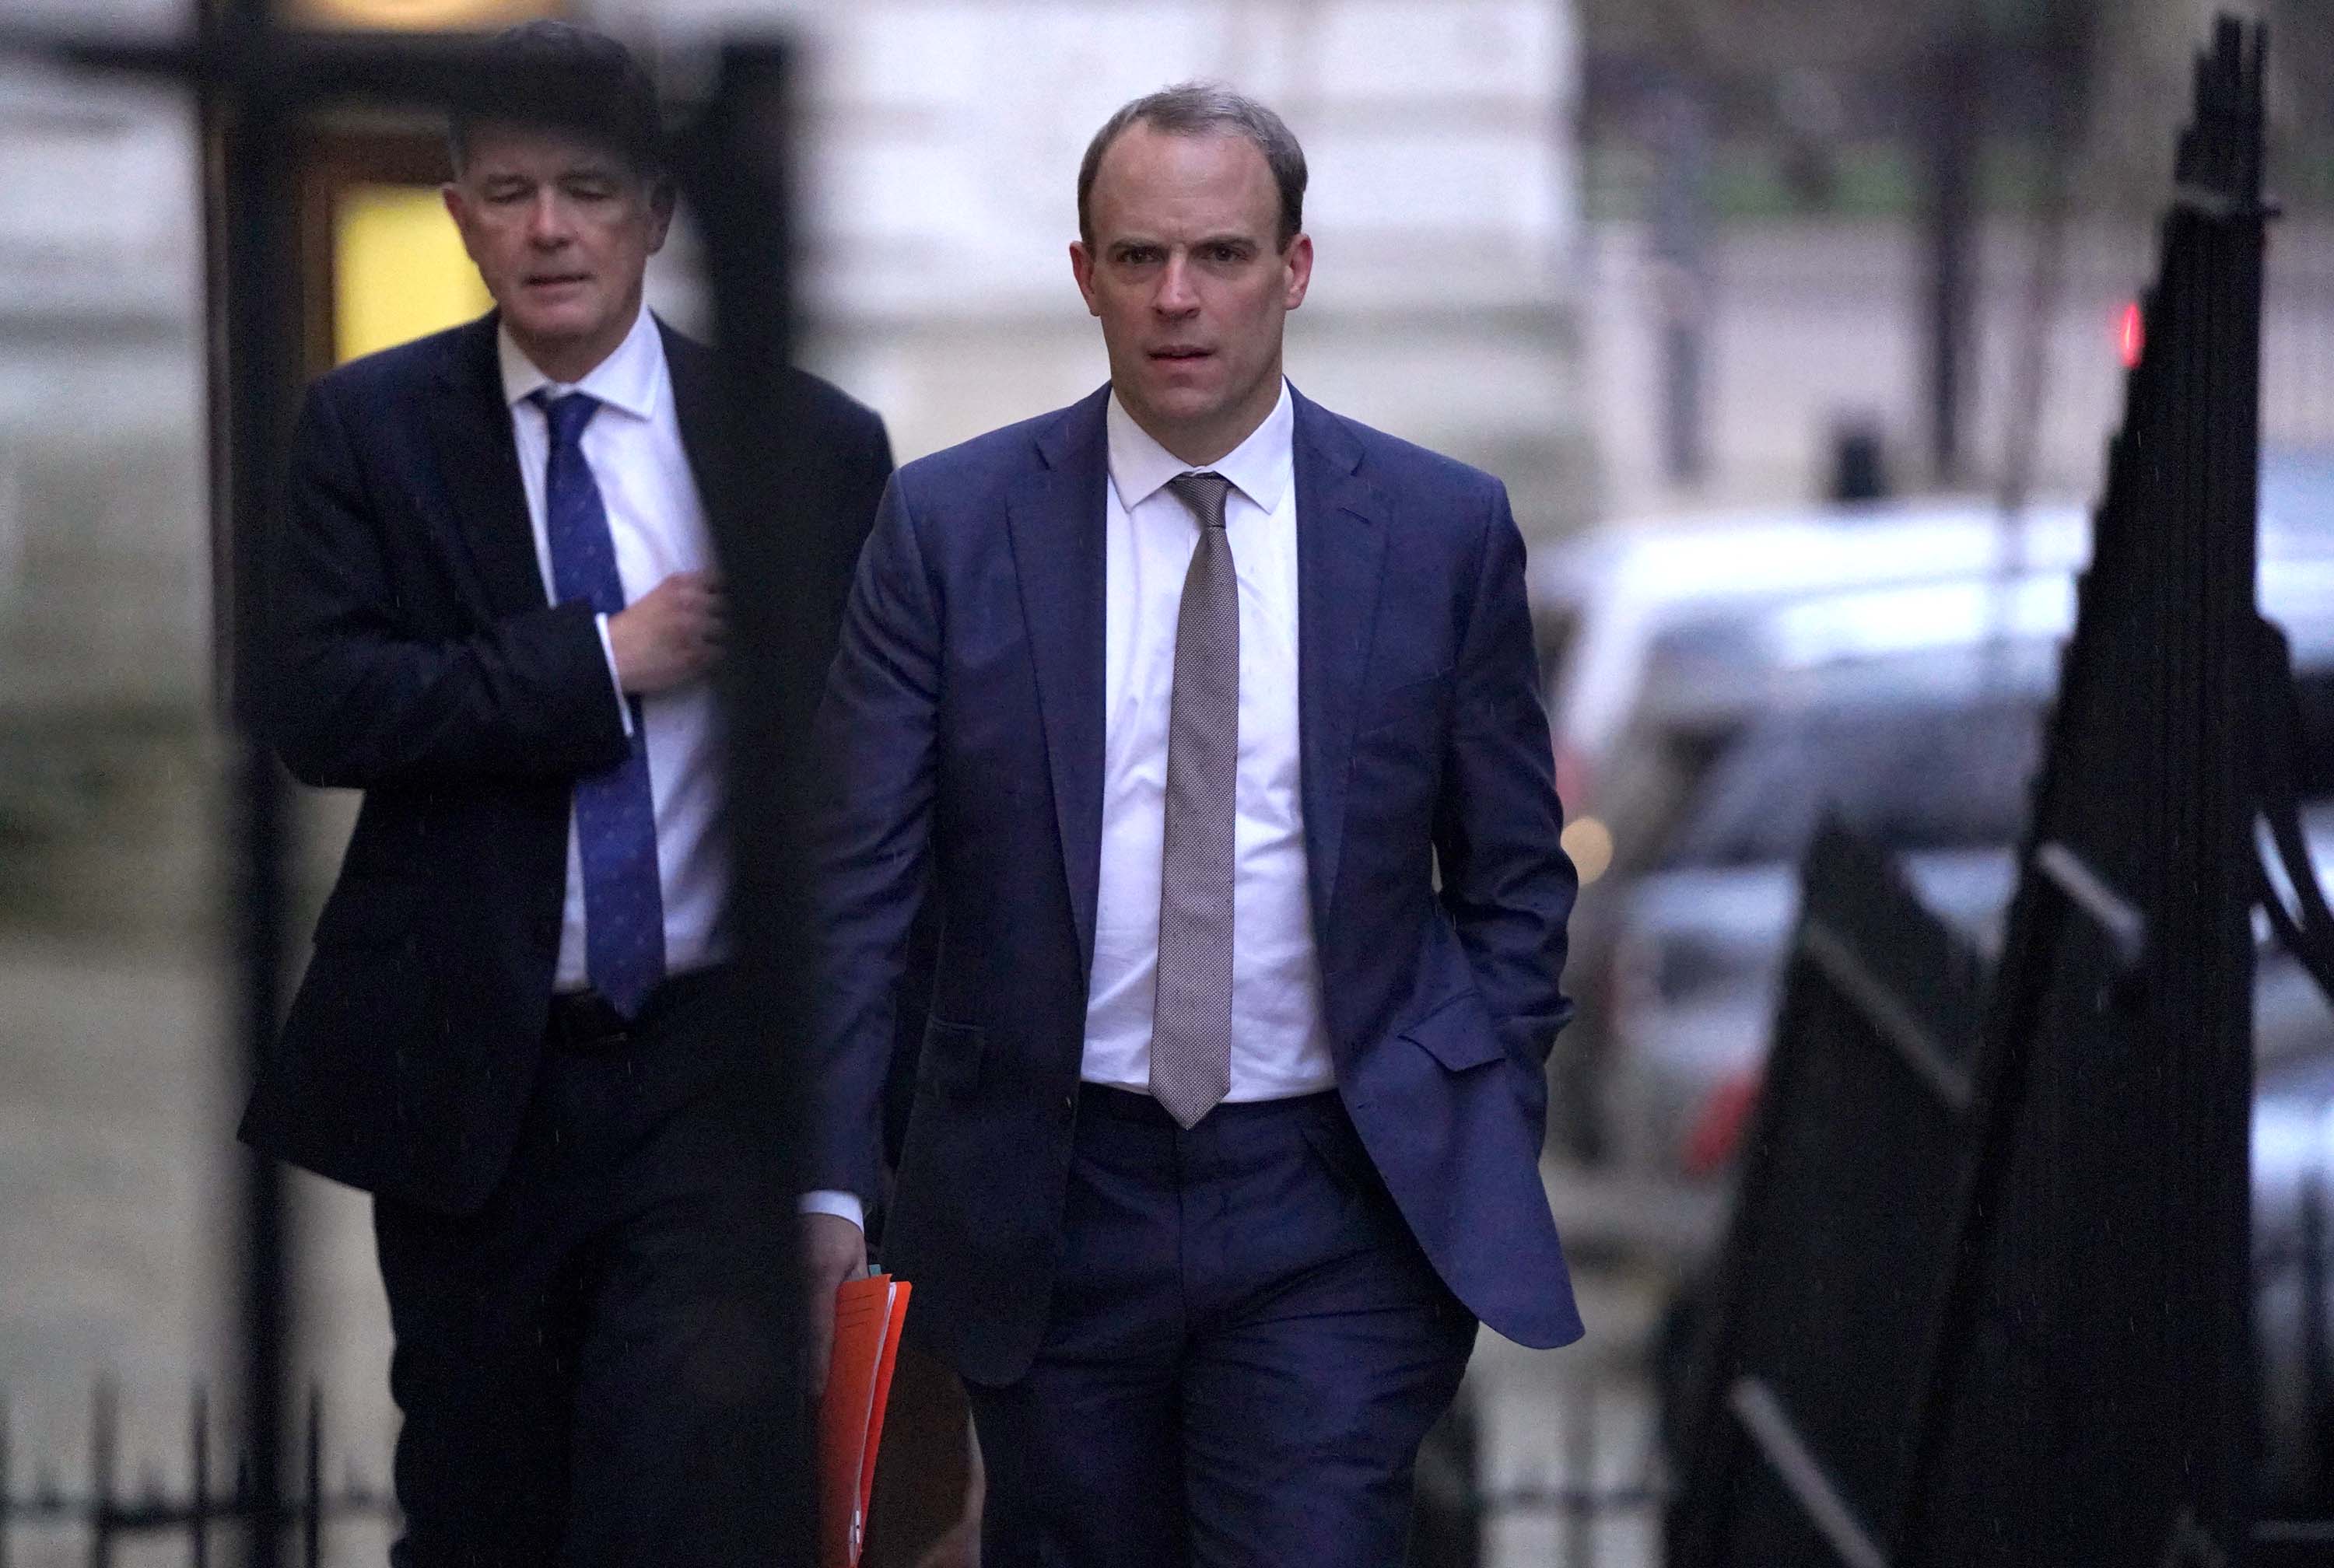 UK Foreign Secretary Dominic Raab arrives to meet with Prime Minister Boris Johnson on January 6 in London, England. Credit: Peter Summers/Getty Images